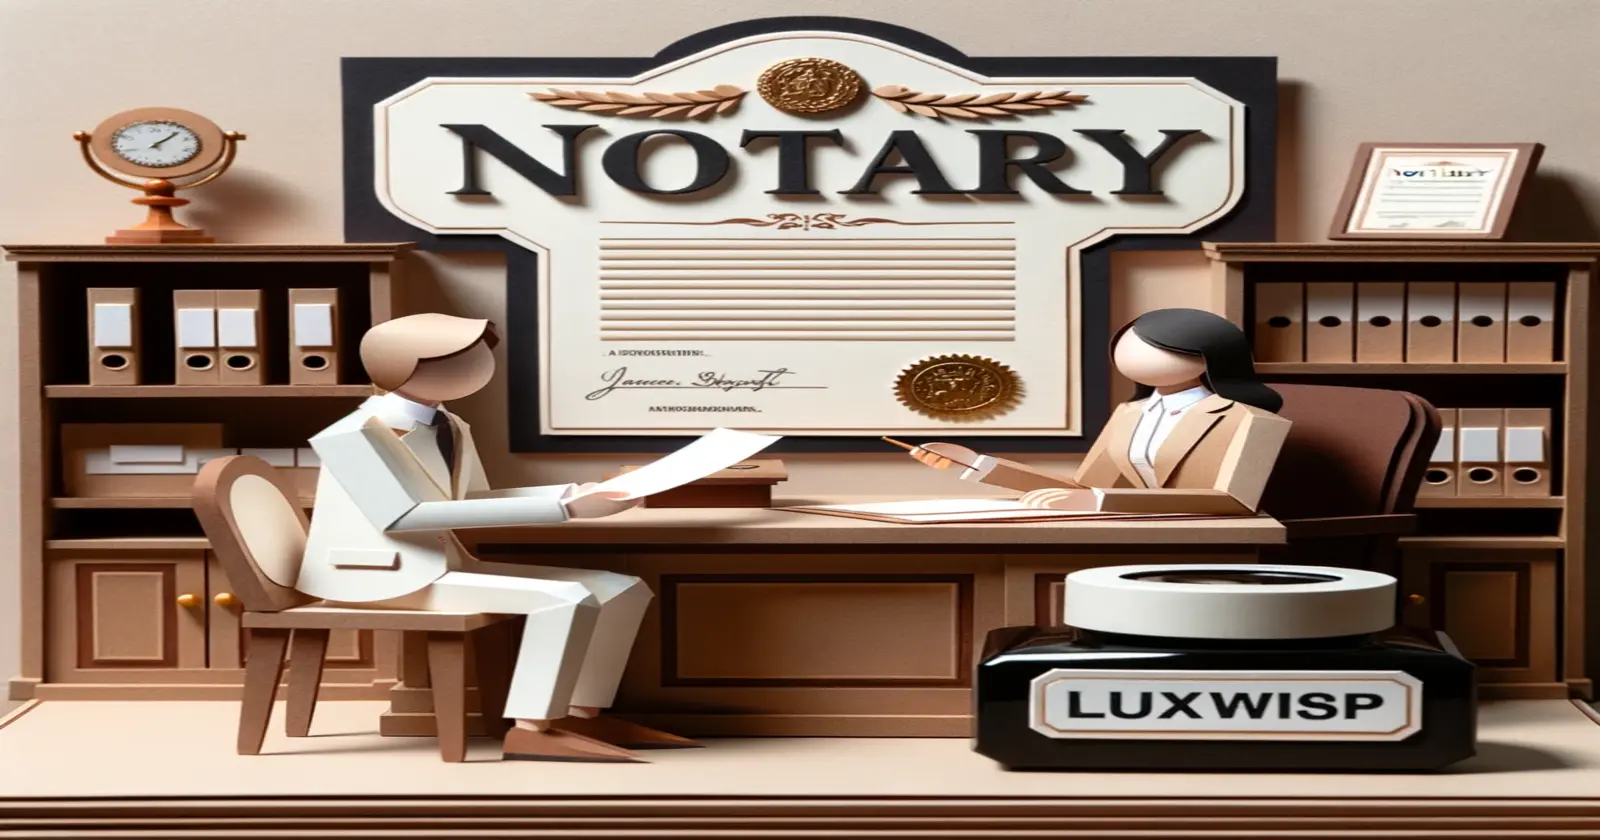 20 Pros and Cons of Being a Notary